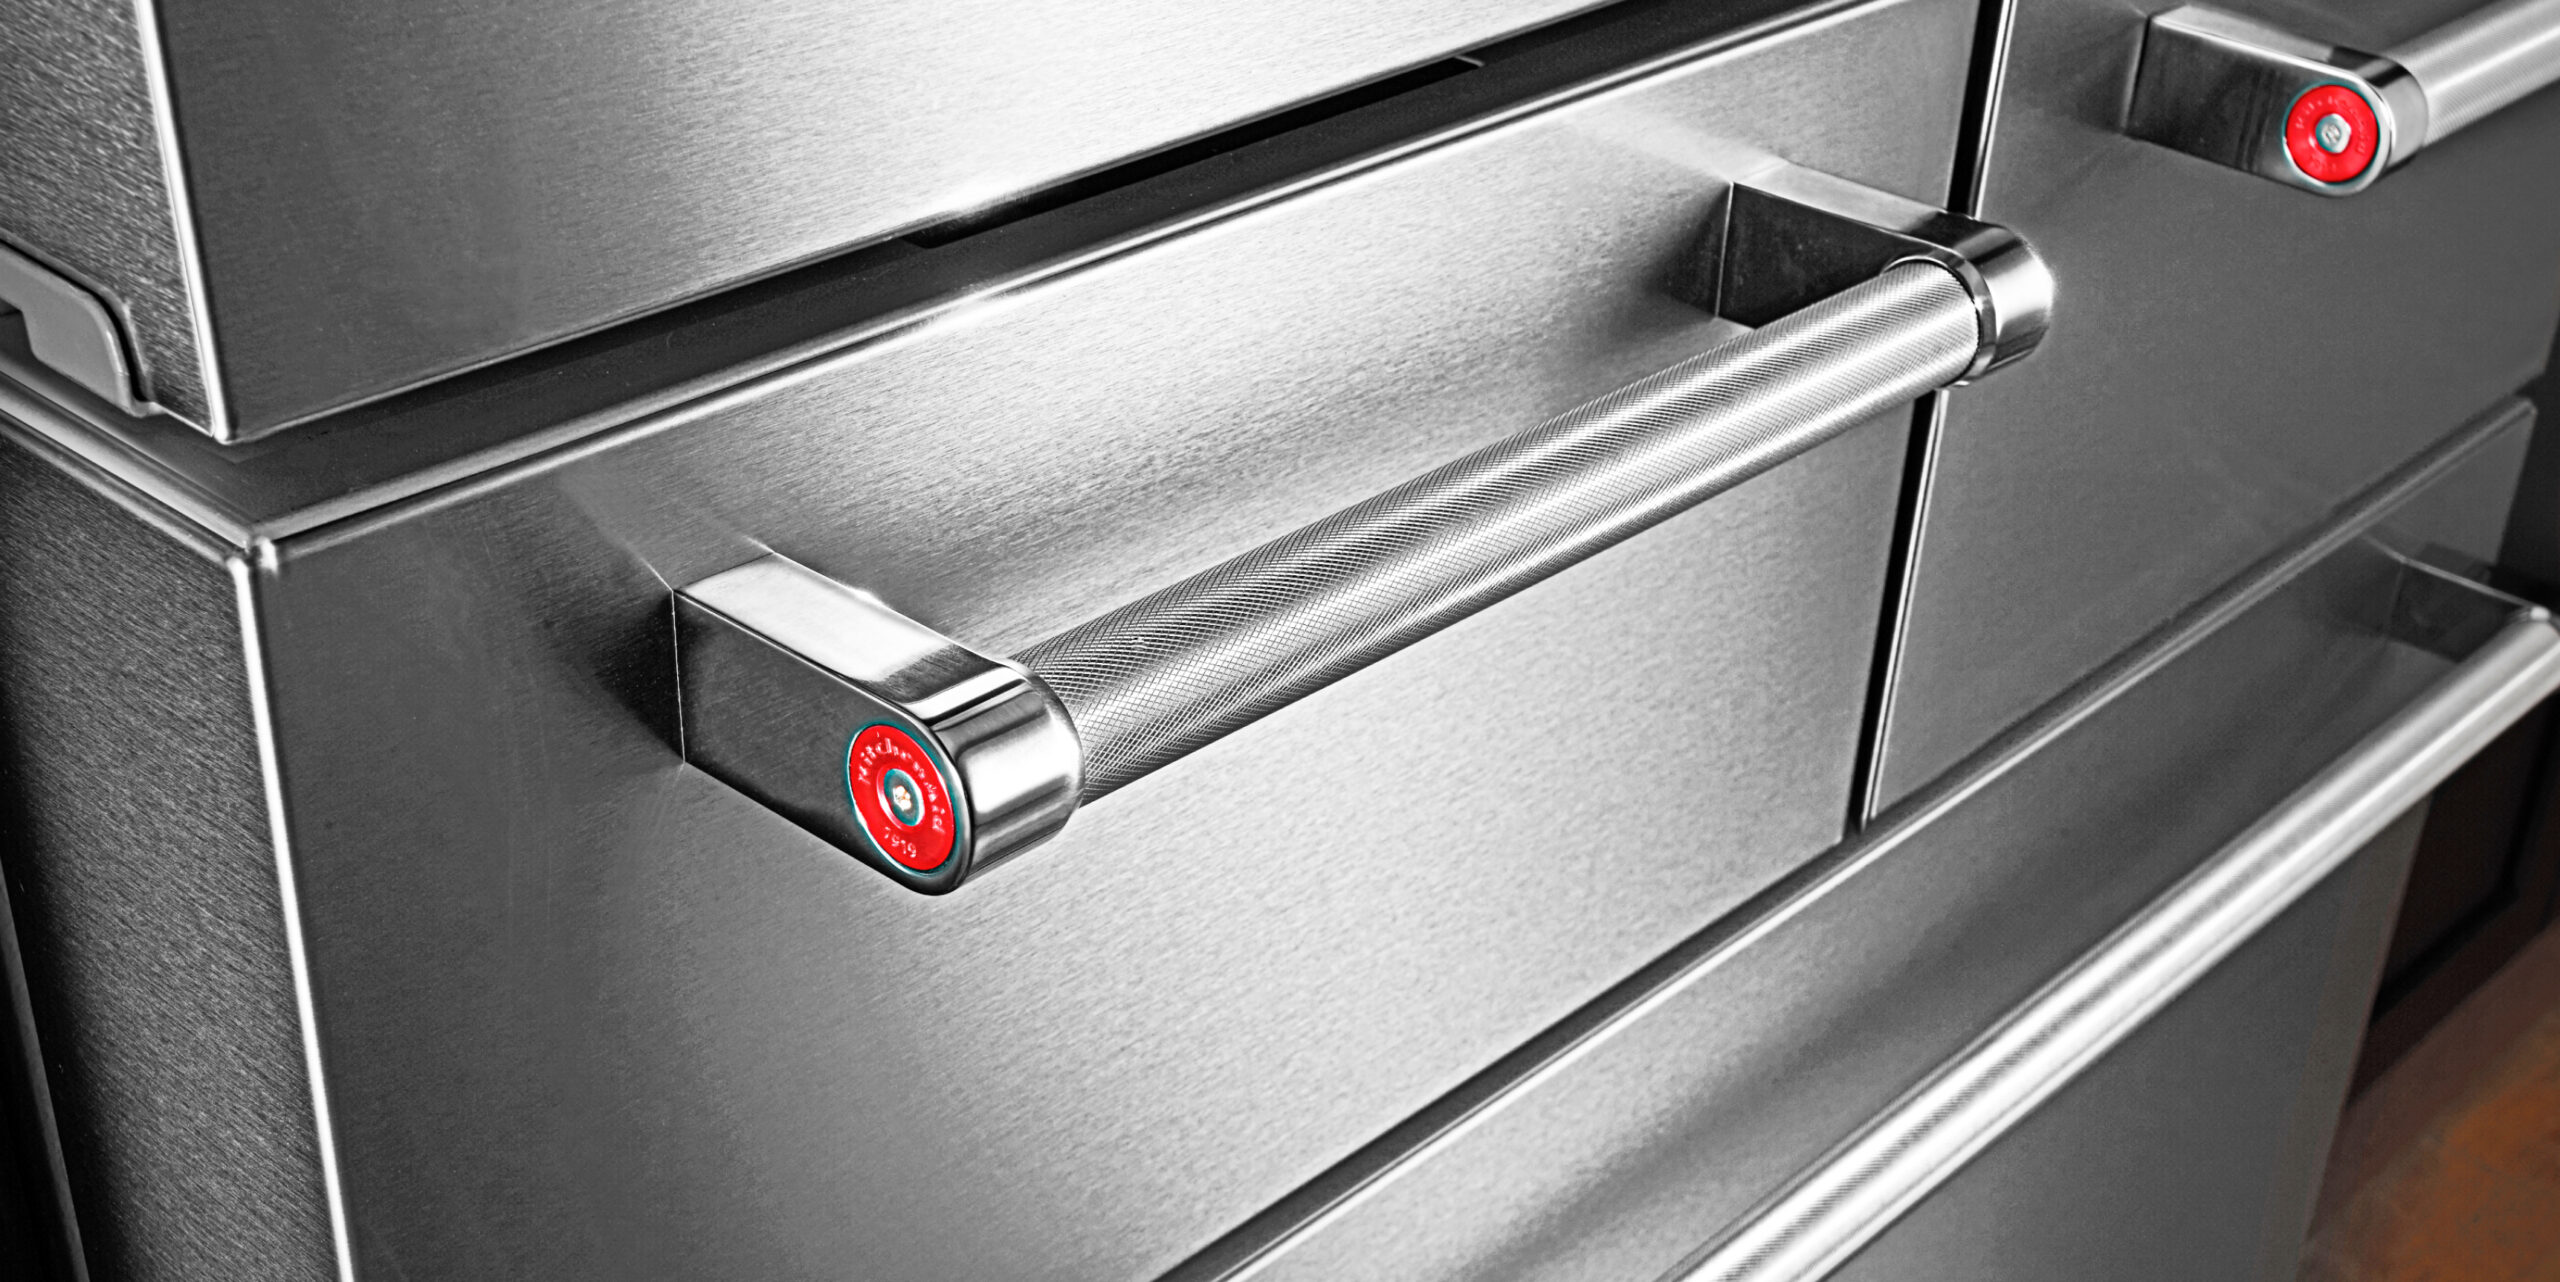 How to Clean and Brighten Stainless Steel Appliances